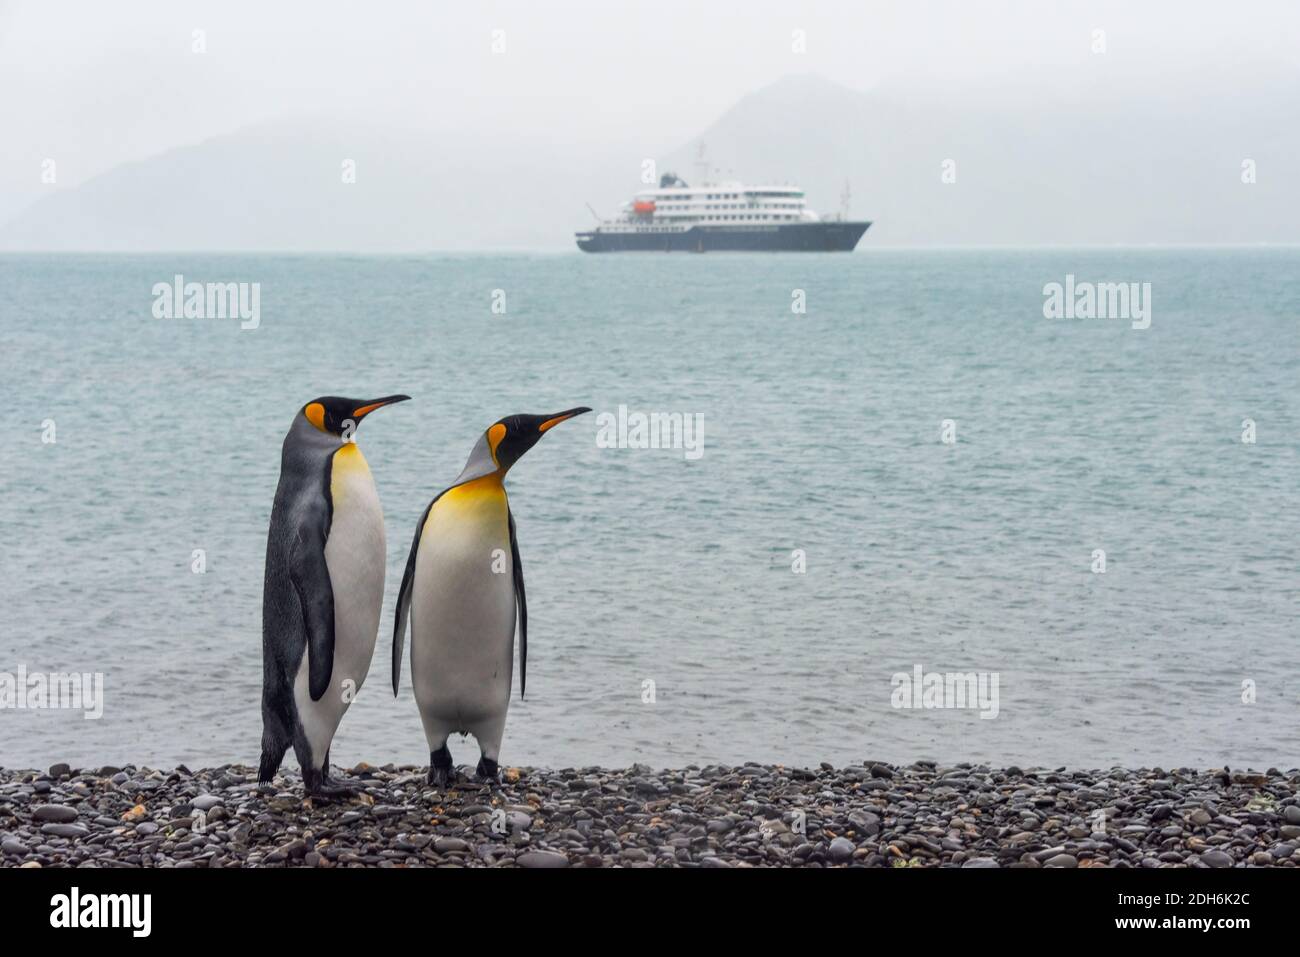 King Penguins on the beach, cruise ship on the ocean in the distance, Prion Island, South Georgia Island Stock Photo